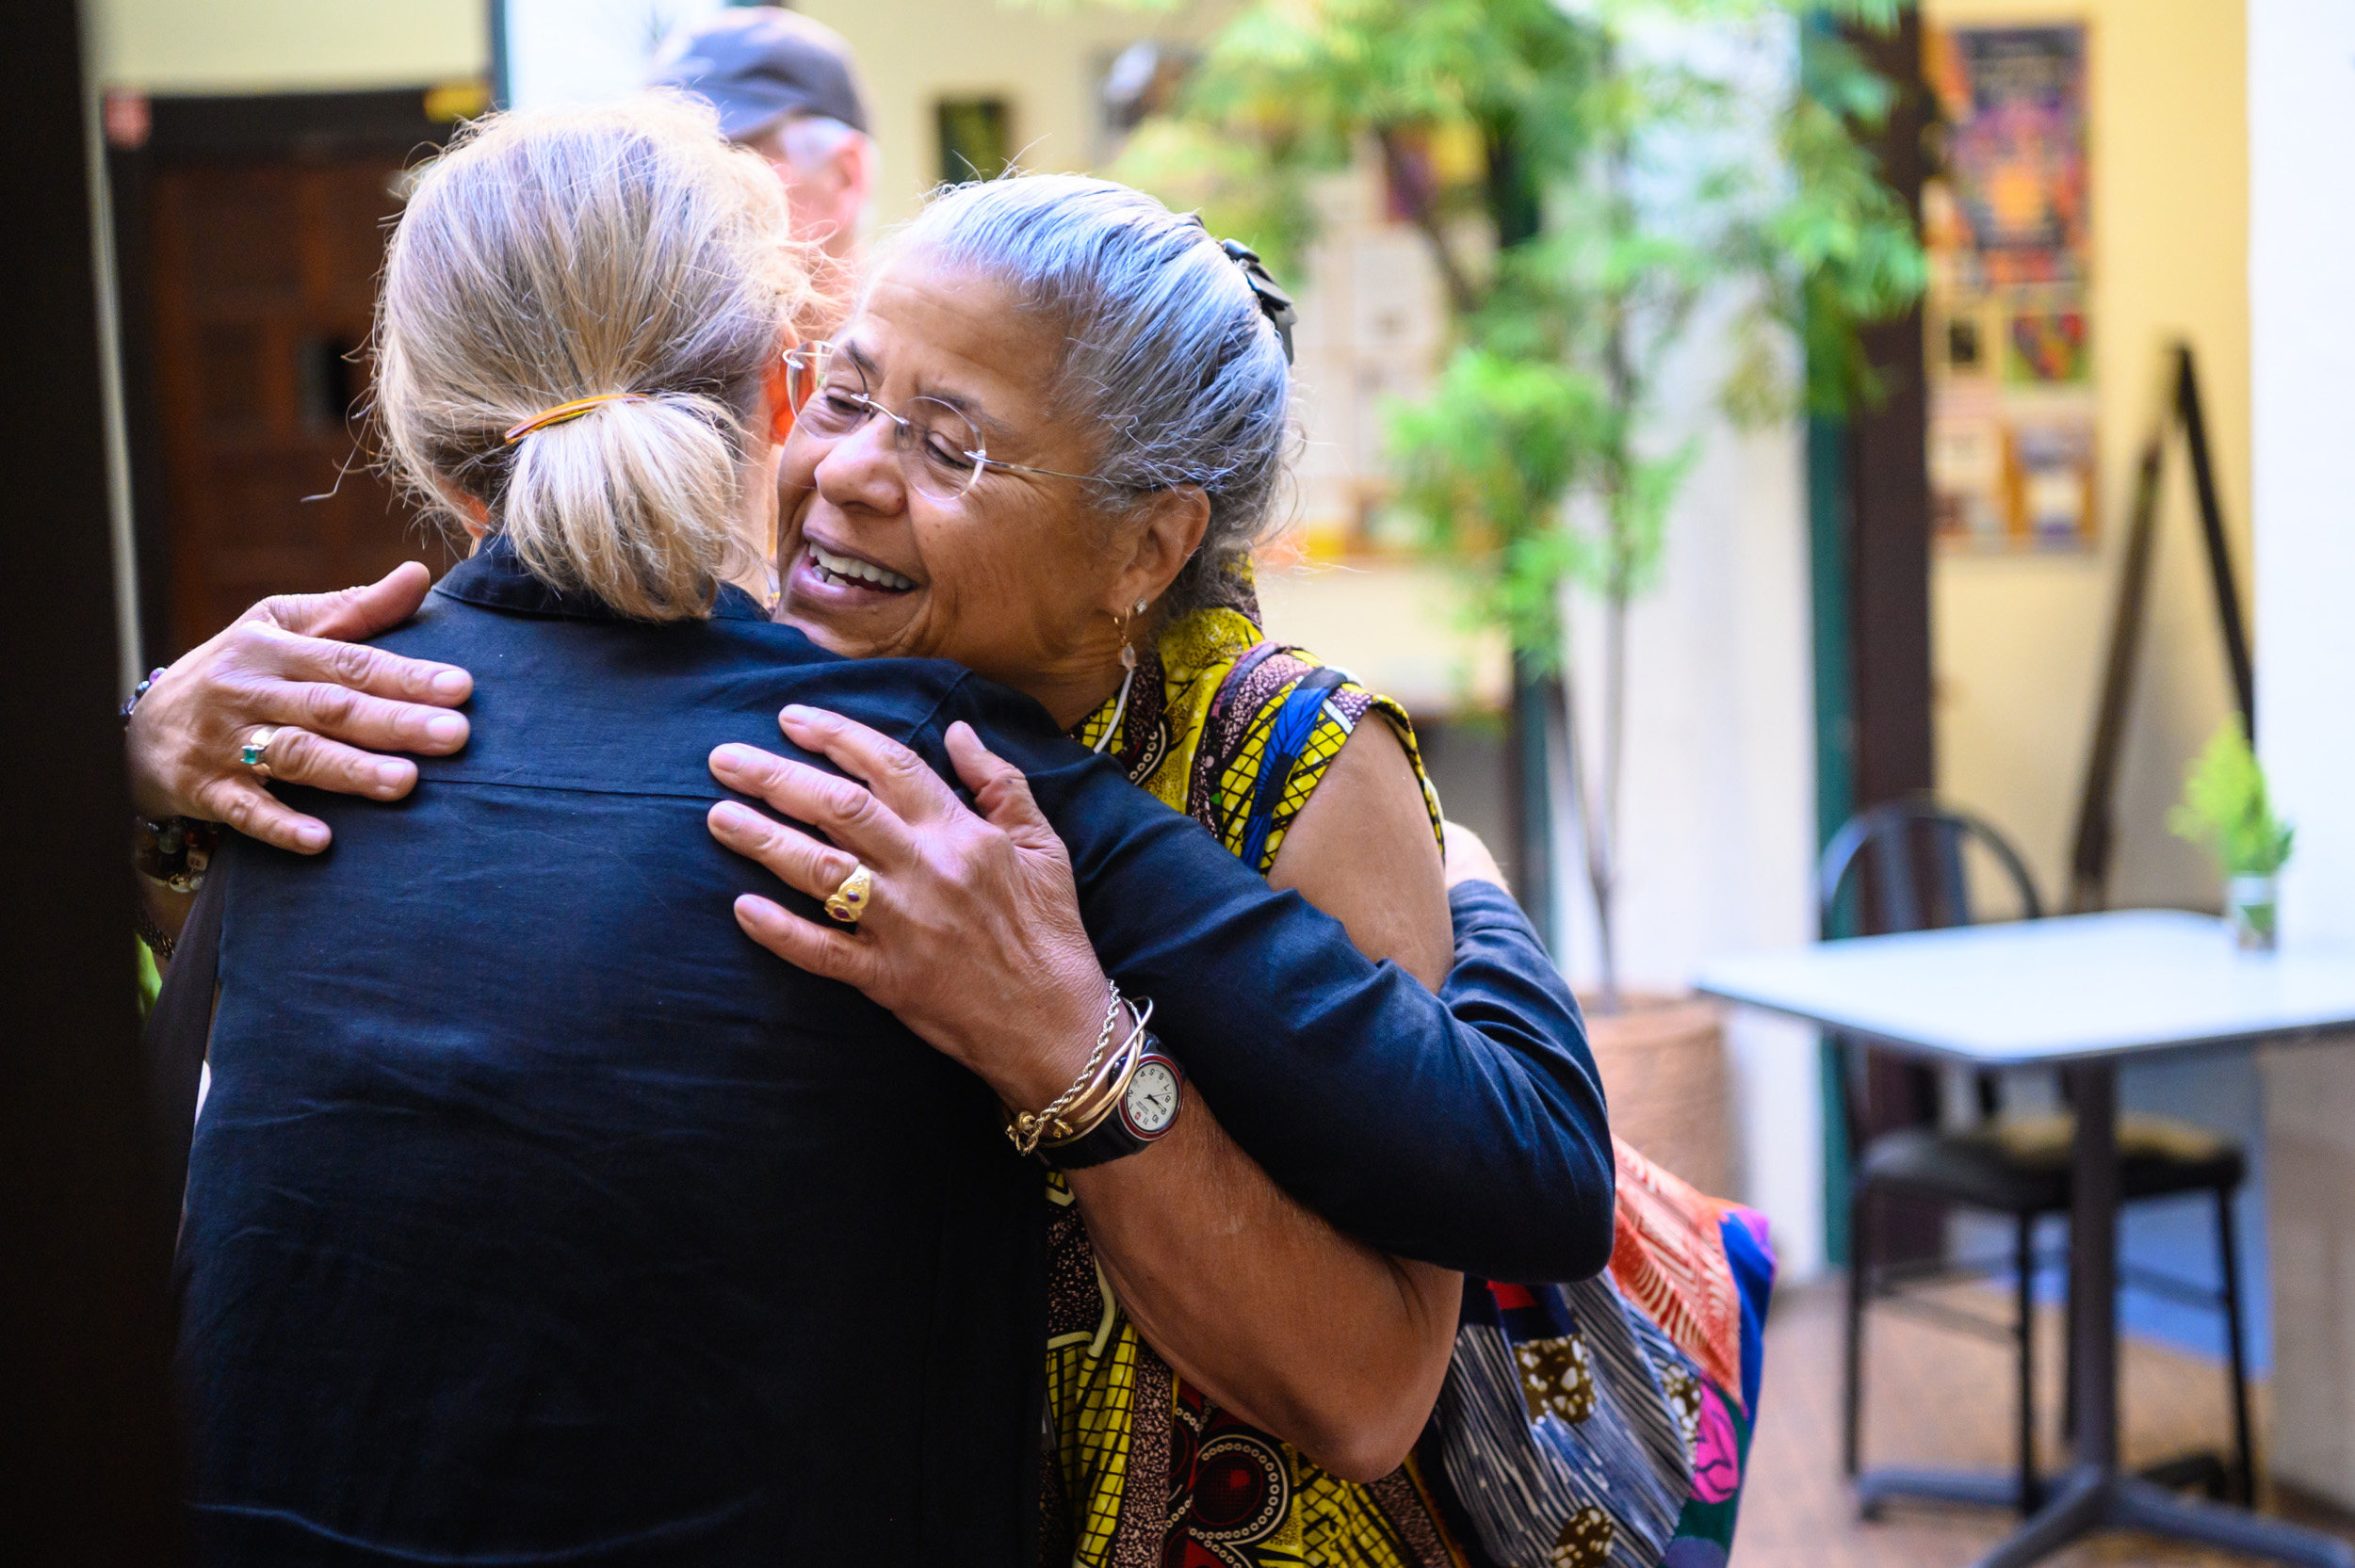 Former Board President Sister Marie Taylor faces the camera and hugs Vice President Vanna Whitney. She has a warm smile on her face.